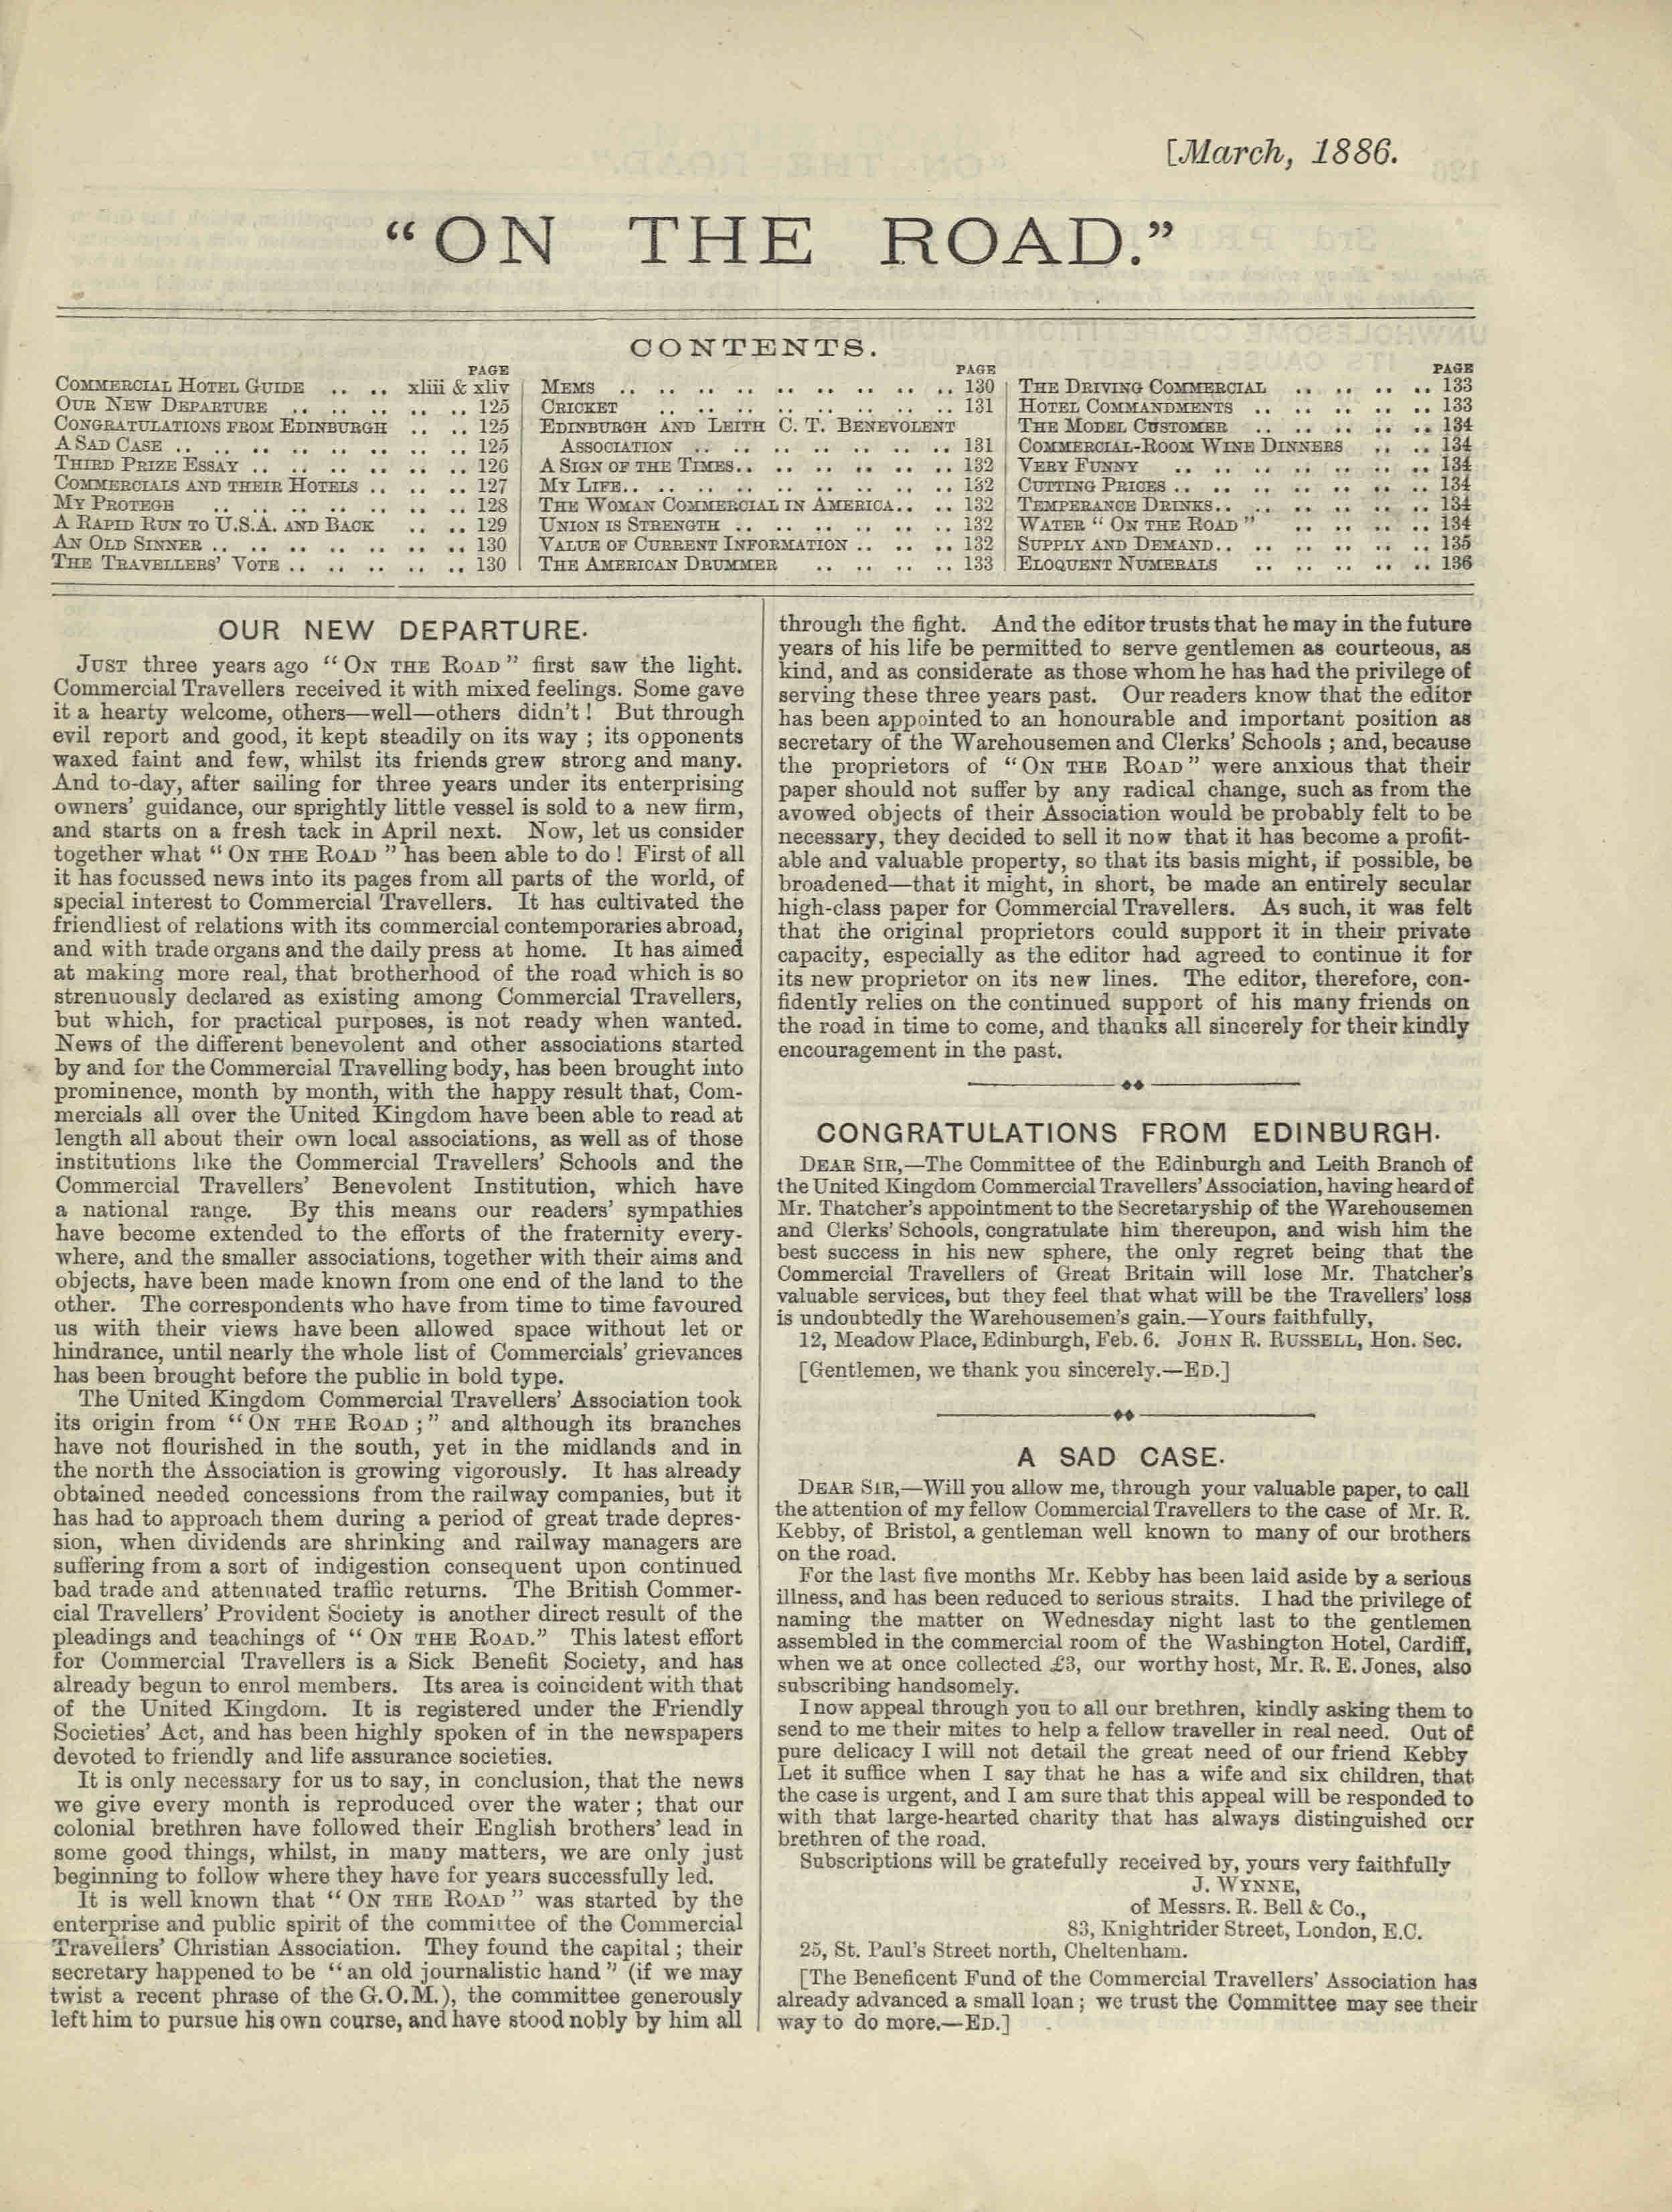 Editorial and contents page of 'On The Road', March 1886. It includes an article about the change in ownership of the journal from the Commercial Travellers' Christian Association to the United Kingdom Commercial Travellers' Association